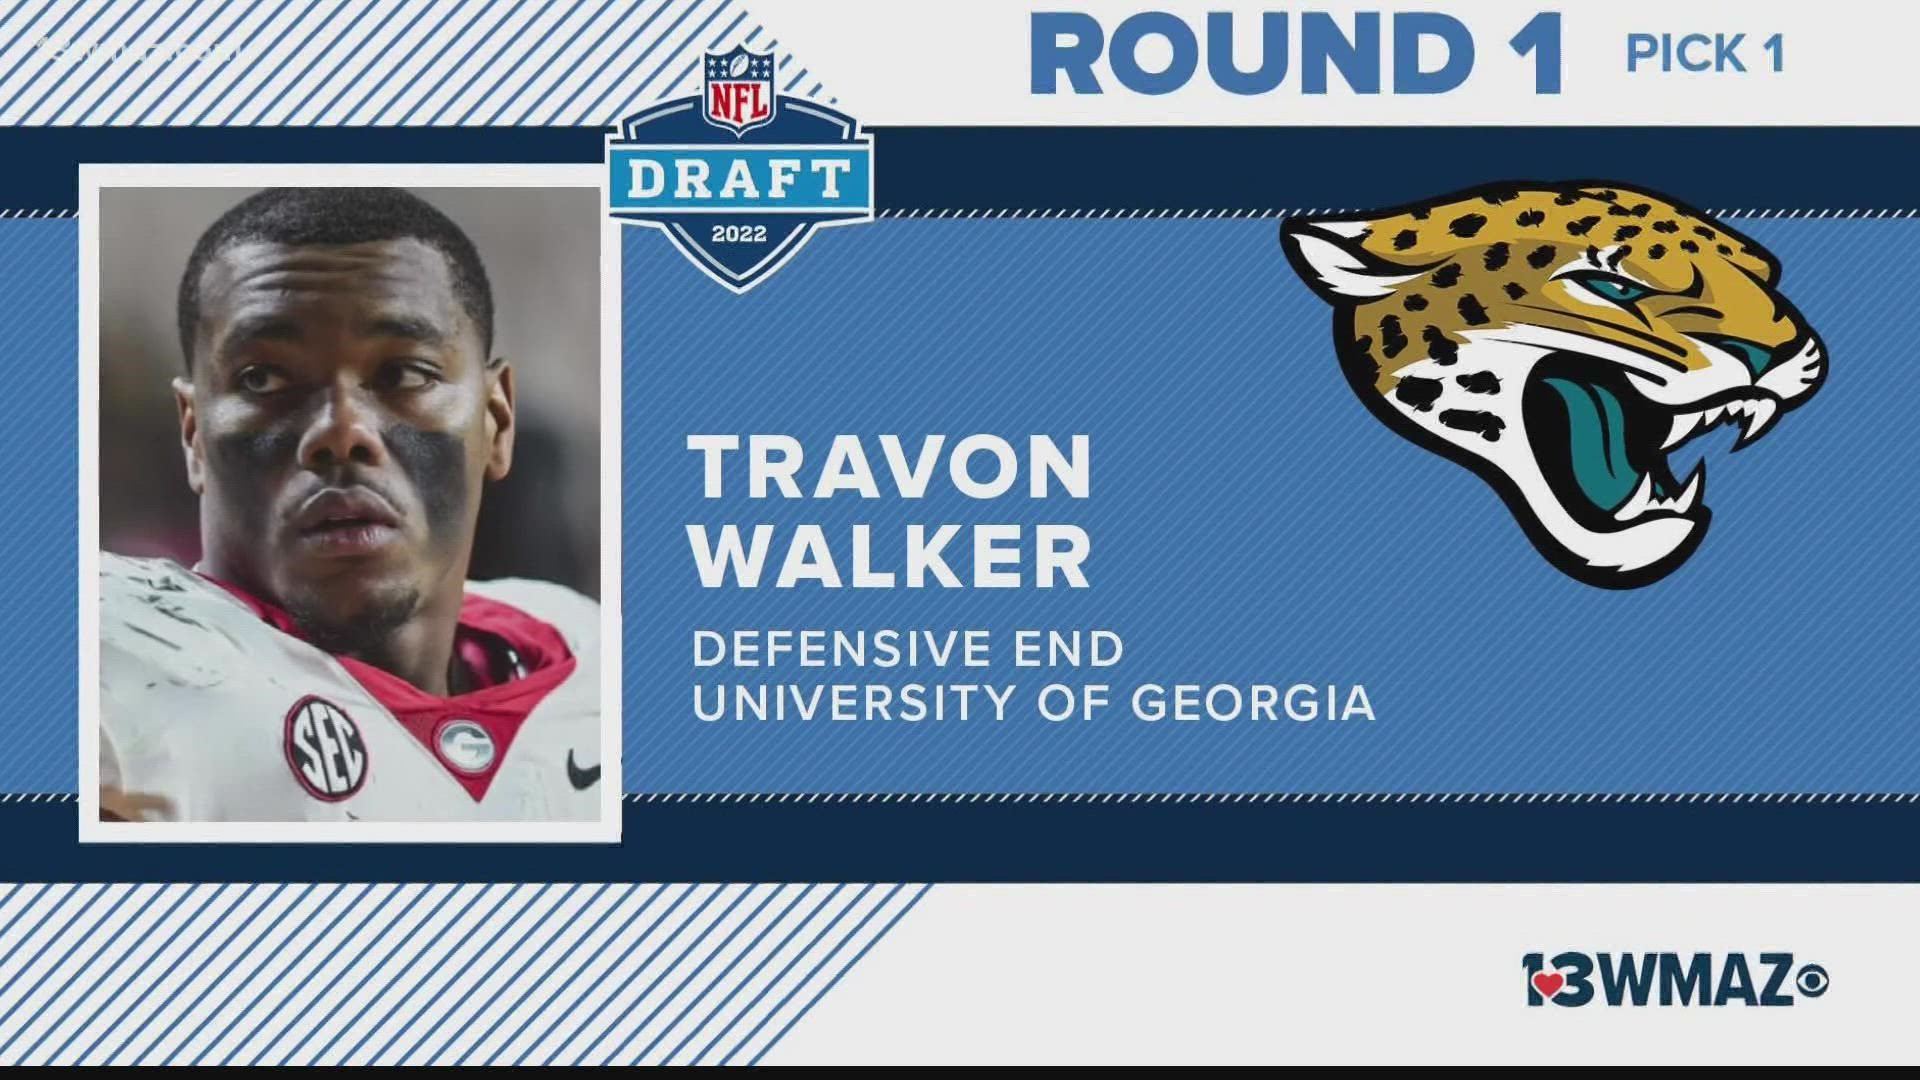 Most major mock drafts had the defensive end going first to the Jacksonville Jaguars.